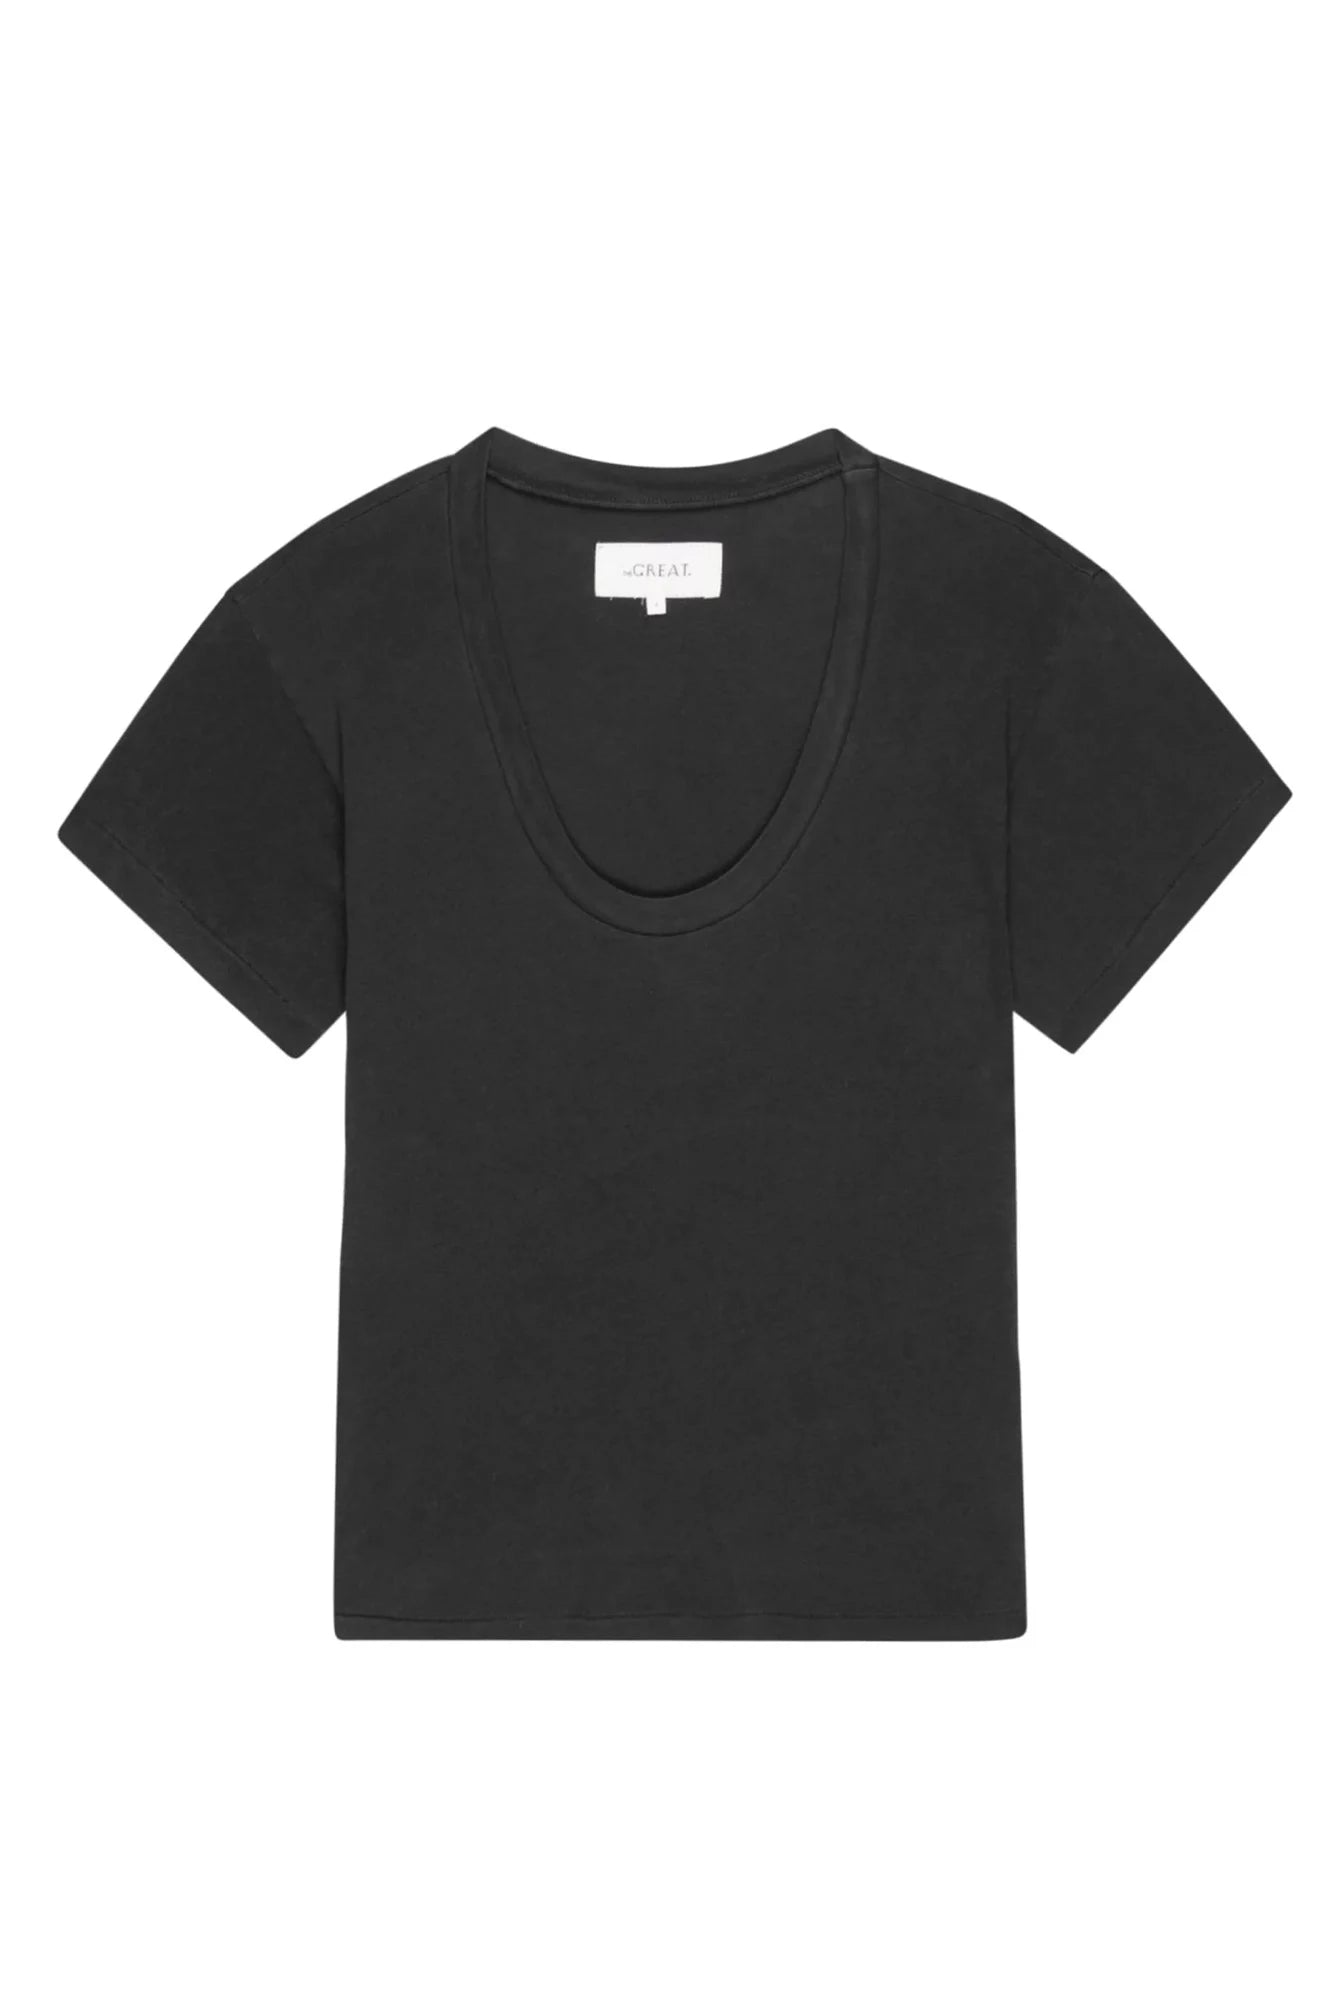 The Slim U-Neck Tee T-Shirts The Great   